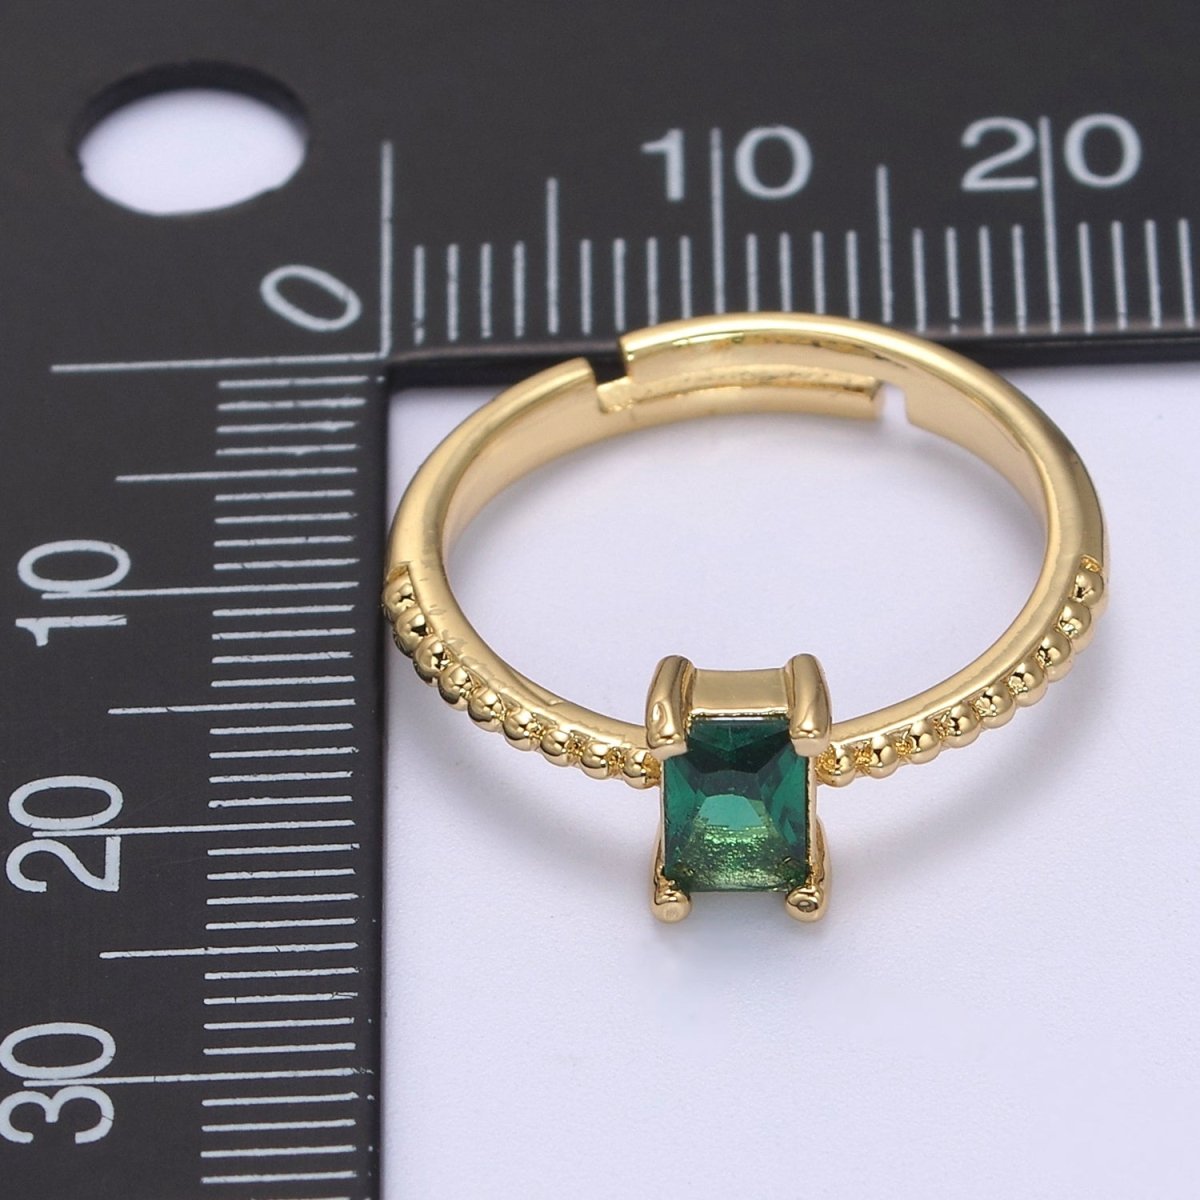 Baguette Crystal Zirconia Dainty 24K Gold Filled Adjustable Solitaire Ring with Beaded Band U-293~U-299 - DLUXCA